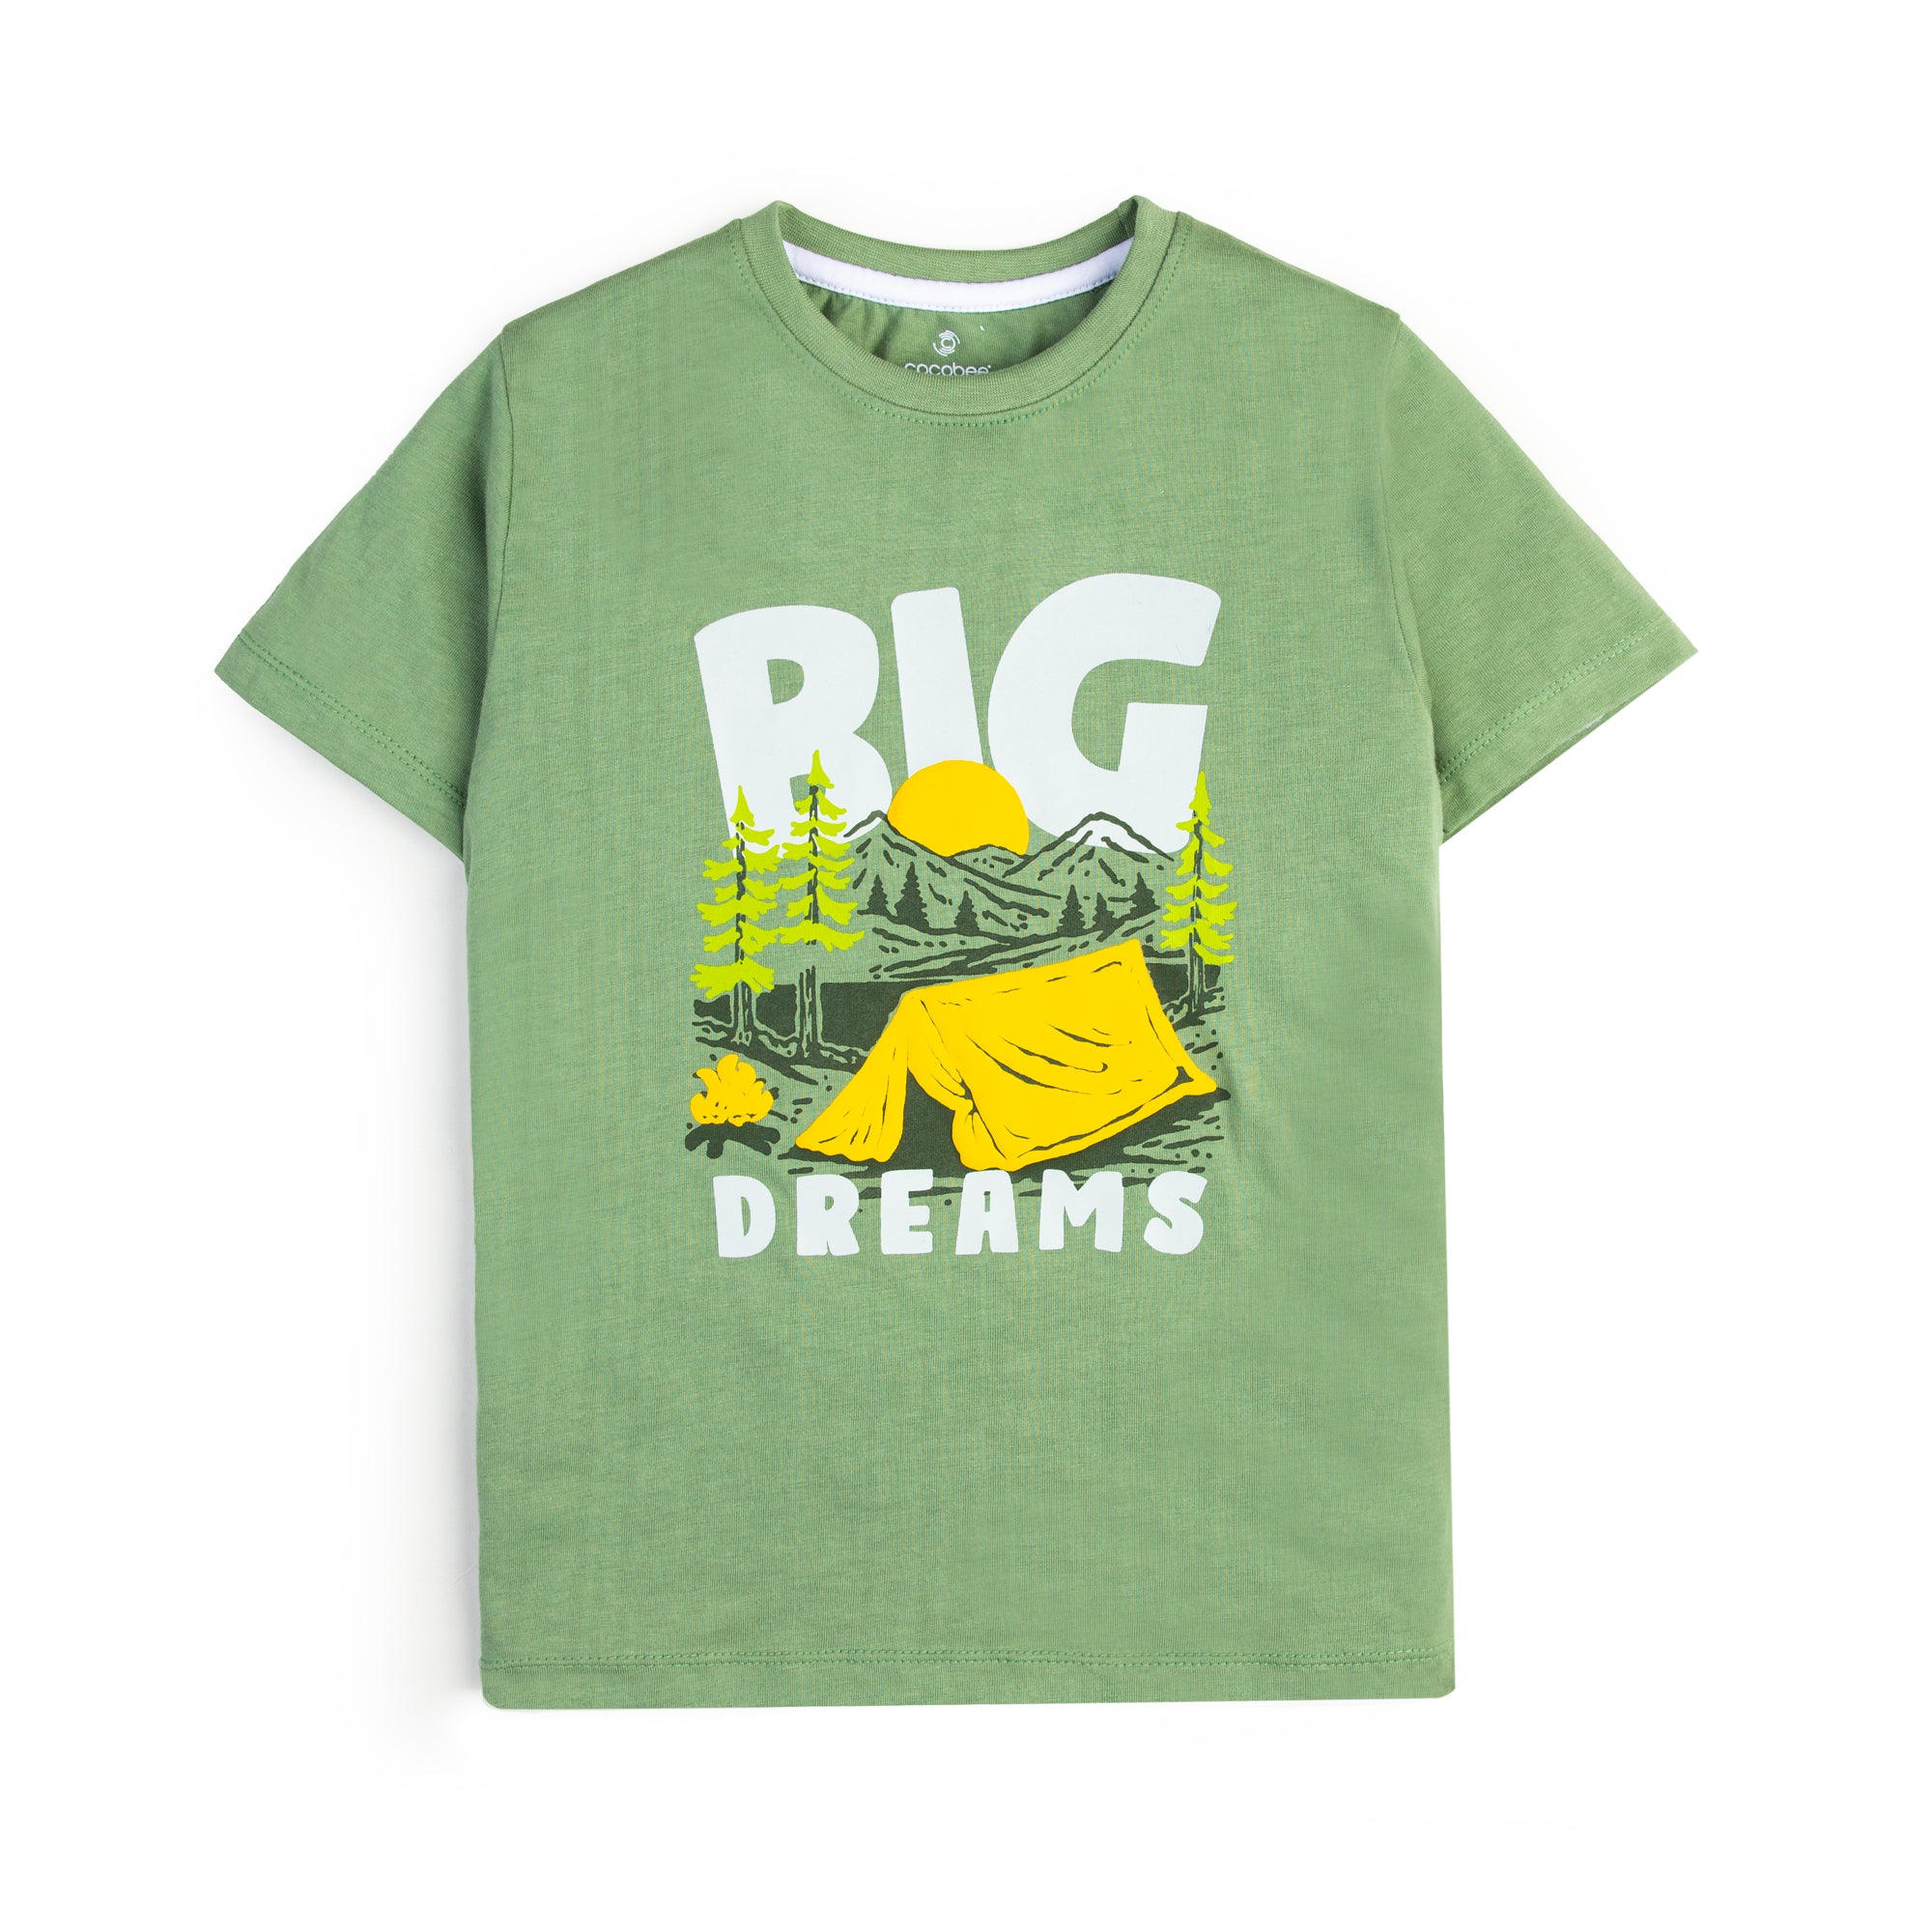 Being Dreamer Graphic Tee